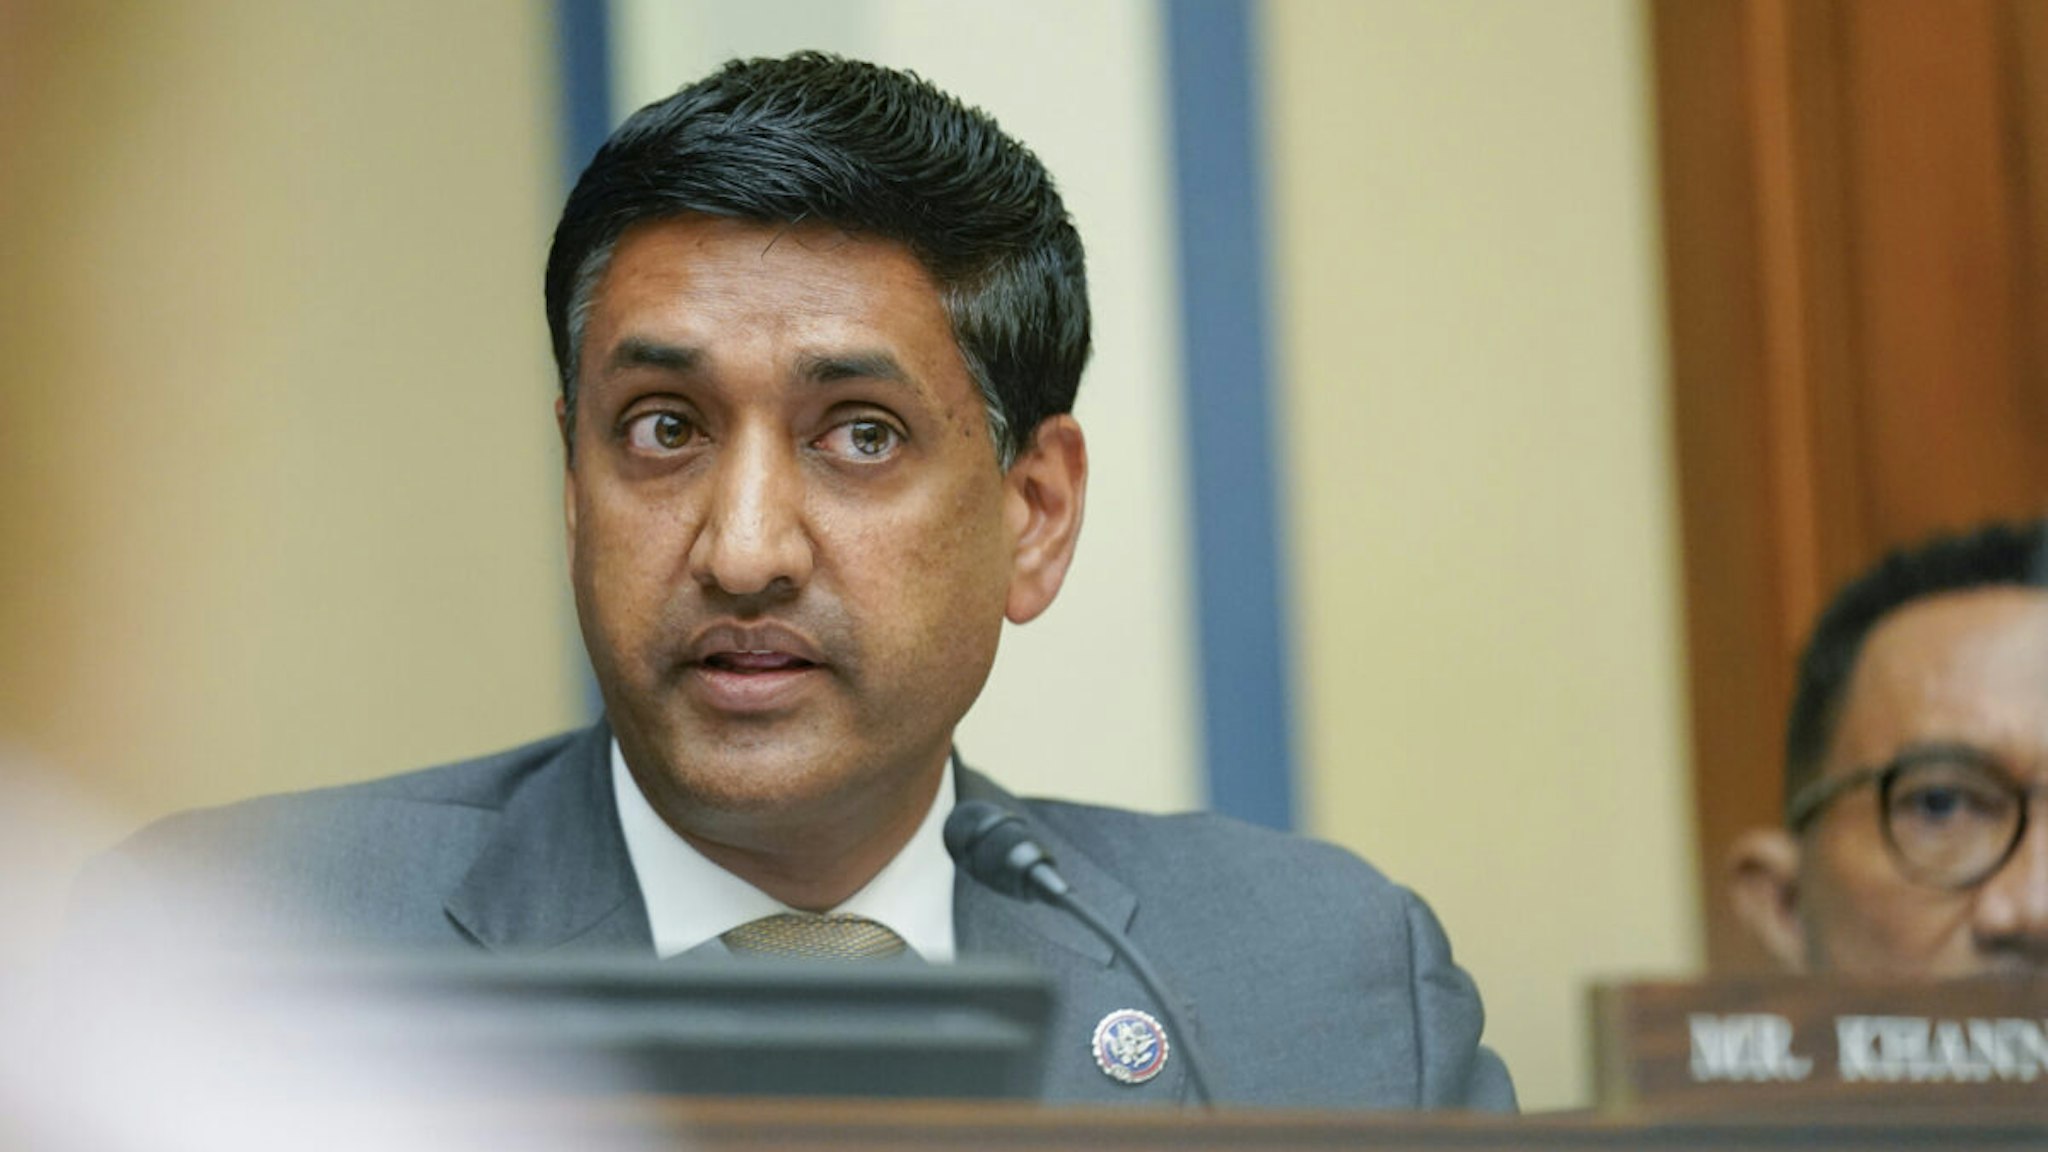 Rep. Ro Khanna (D-CA) speaks during a House Committee on Oversight and Reform hearing on gun violence on Capitol Hill on June 8, 2022 in Washington, DC